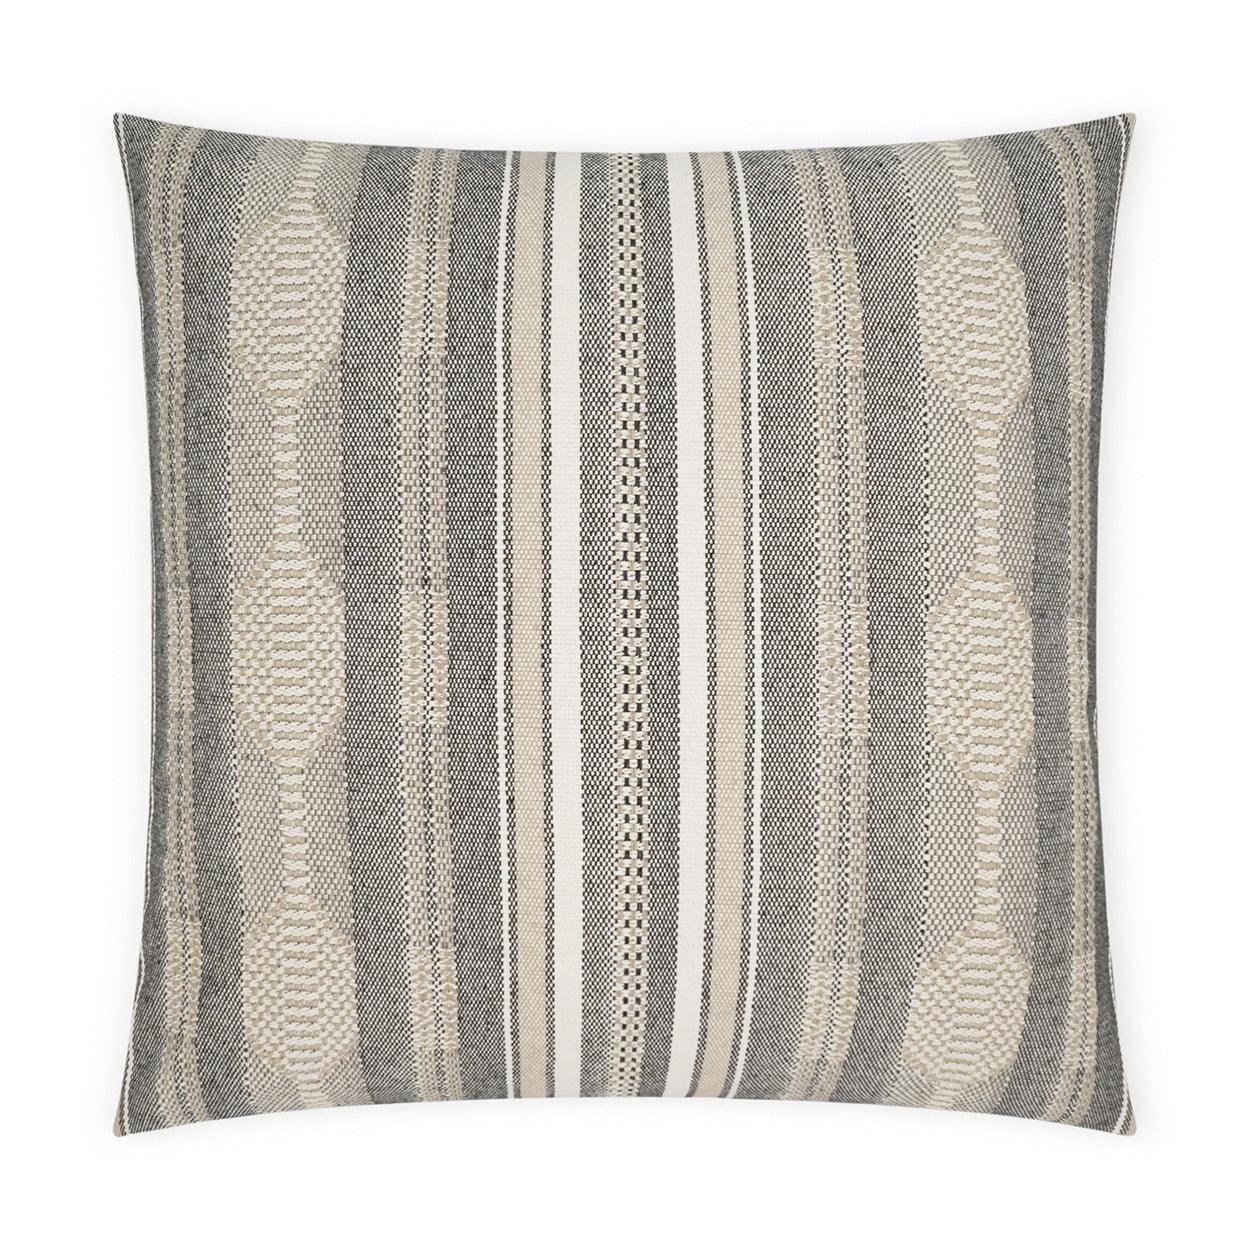 Hours Sand Global Tan Taupe Large Throw Pillow With Insert - Uptown Sebastian